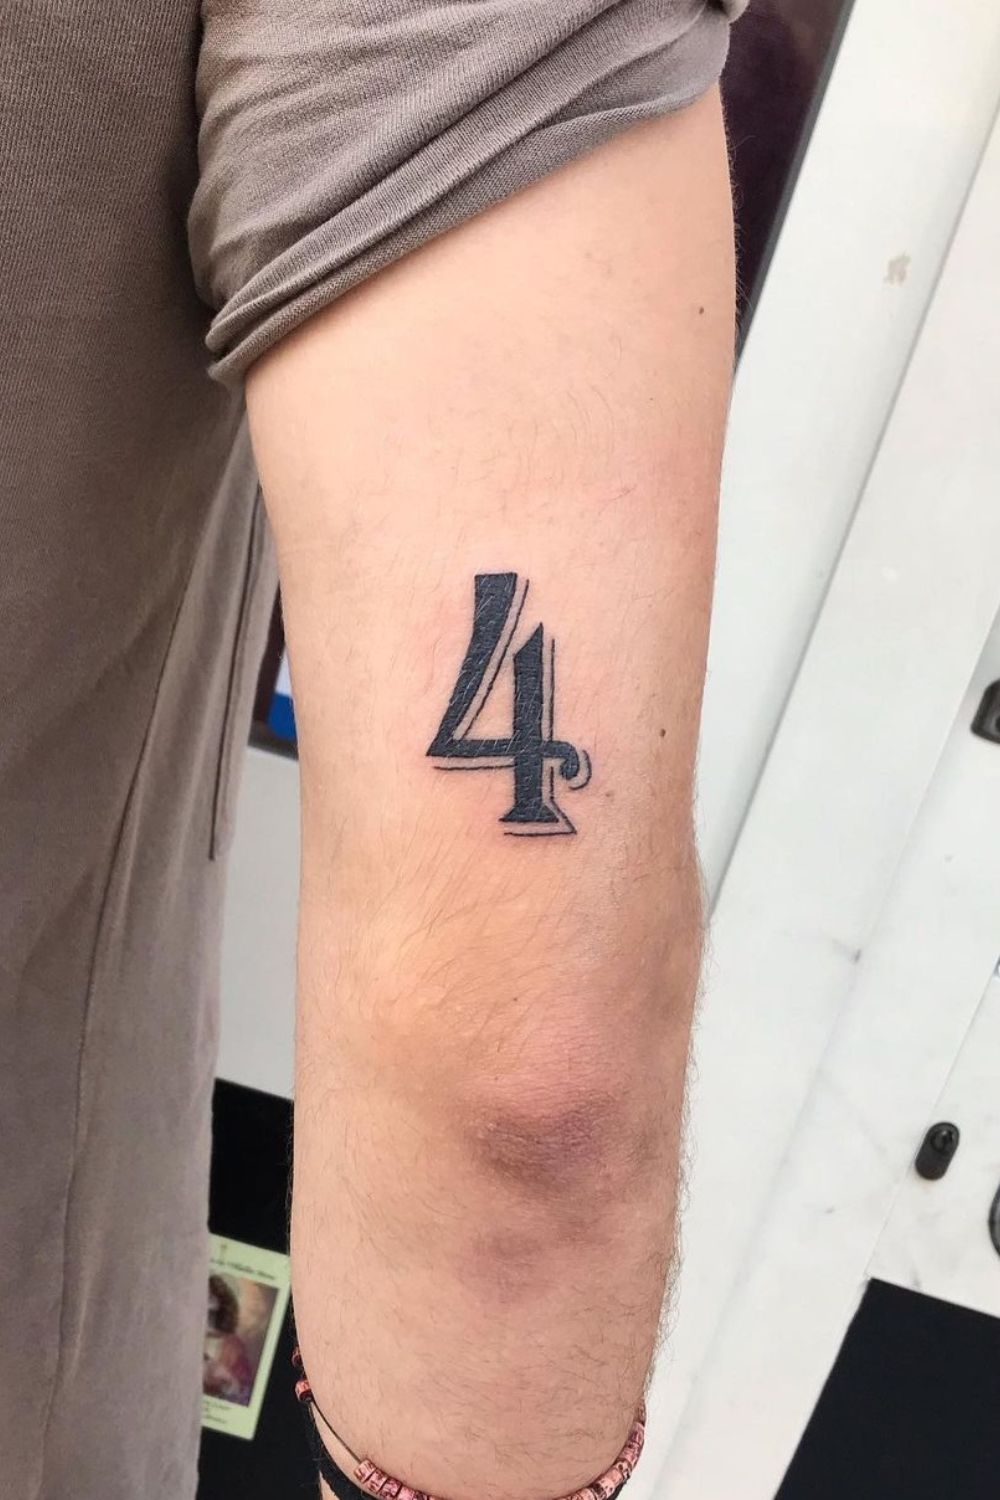 Best Number 4 Tattoo Ideas and Meanings - Sarah Scoop